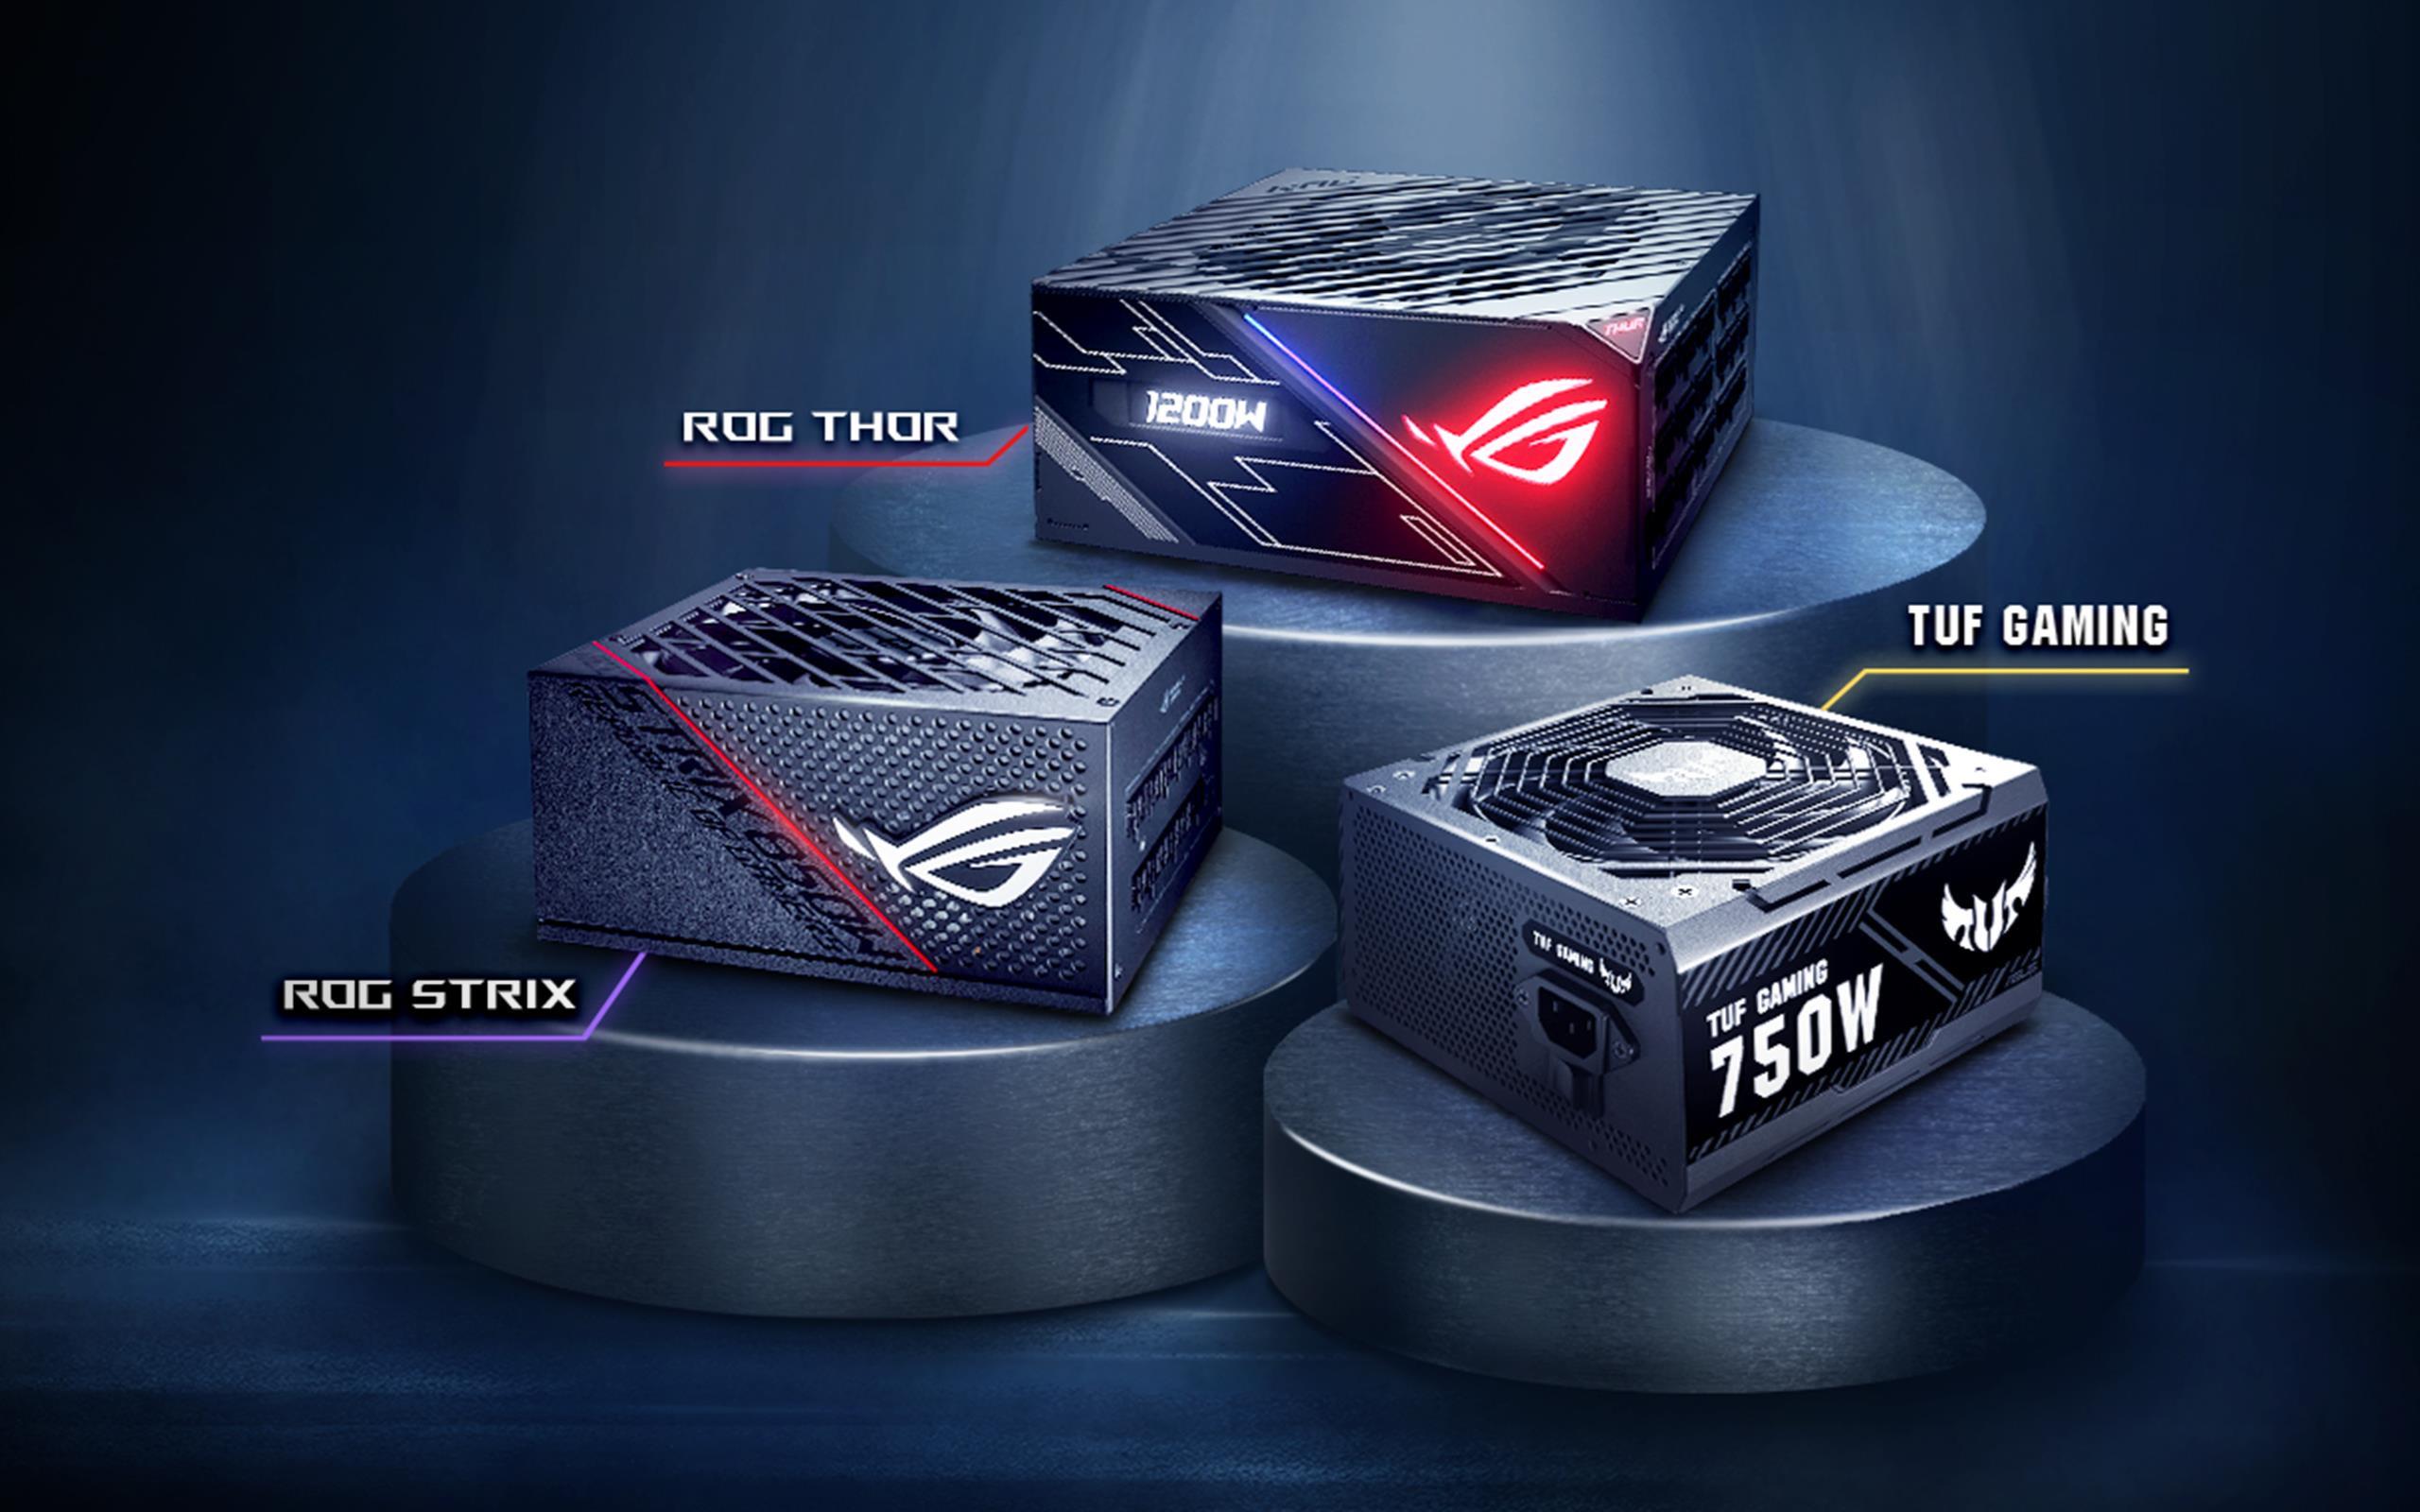 ASUS Power Supply Units